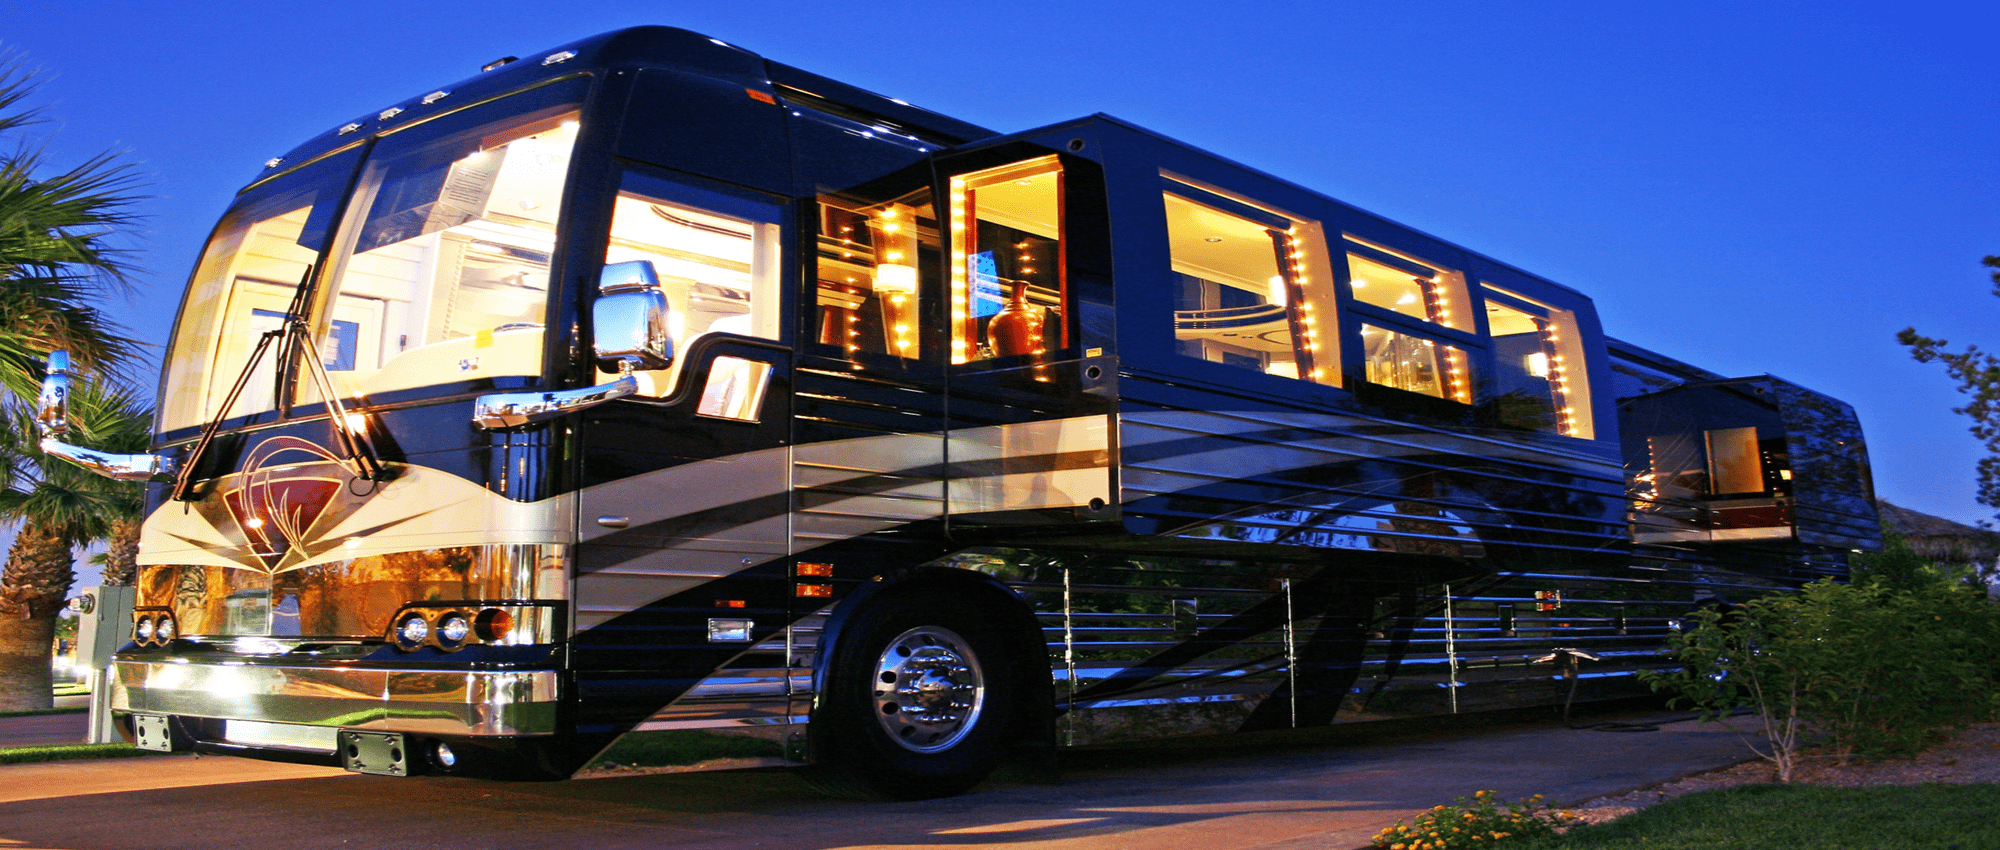 A very large comfortable RV is parked in a driveway.